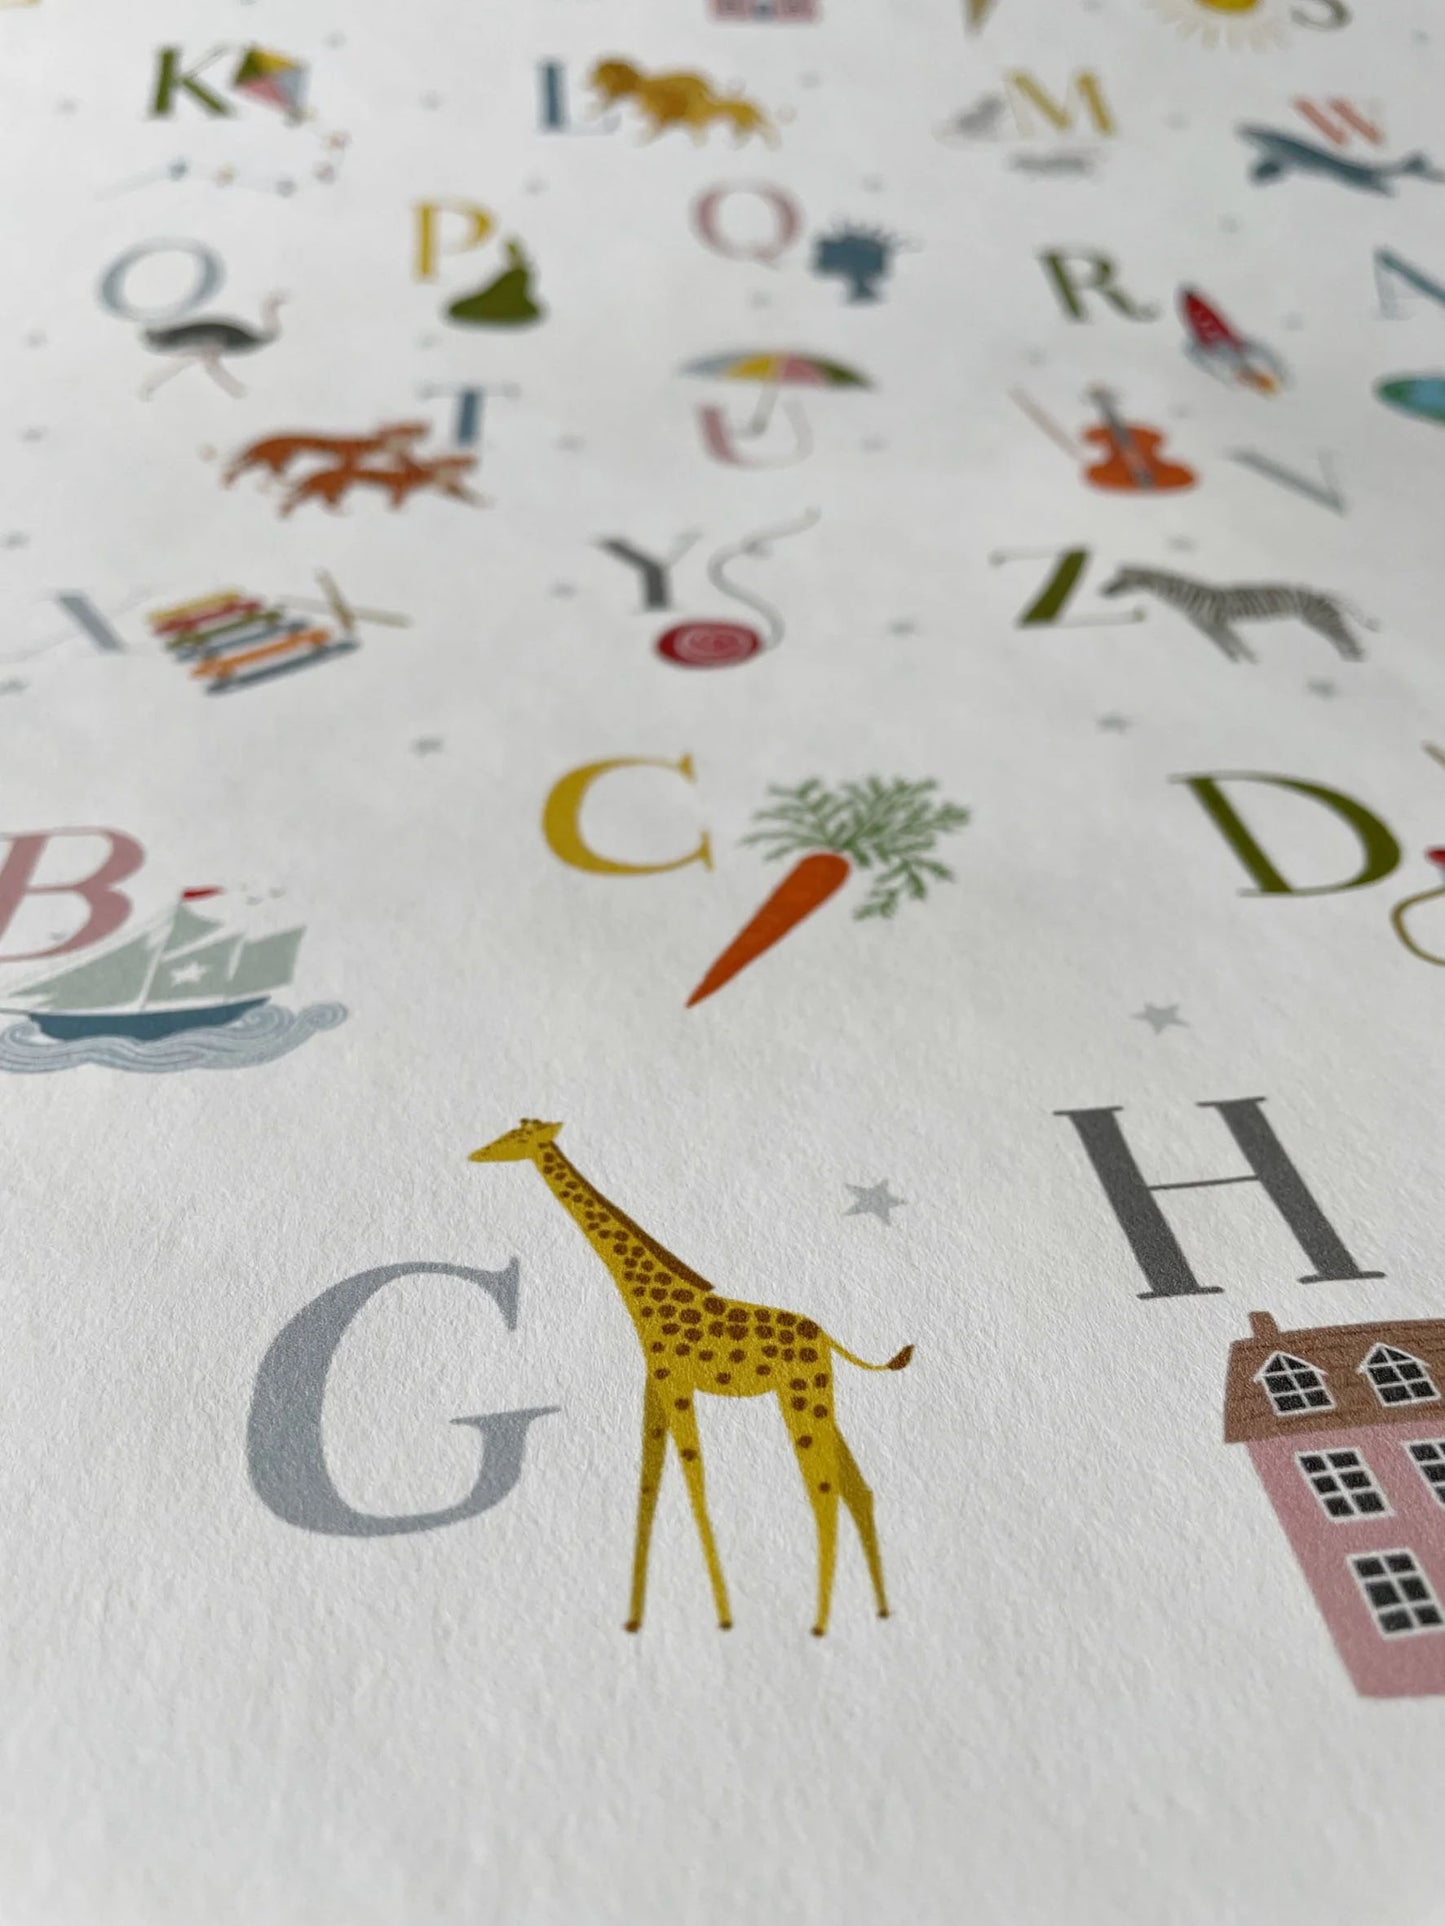 Close up of ABC luxury children's wallpaper with letters of the alphabet and icons for each letter